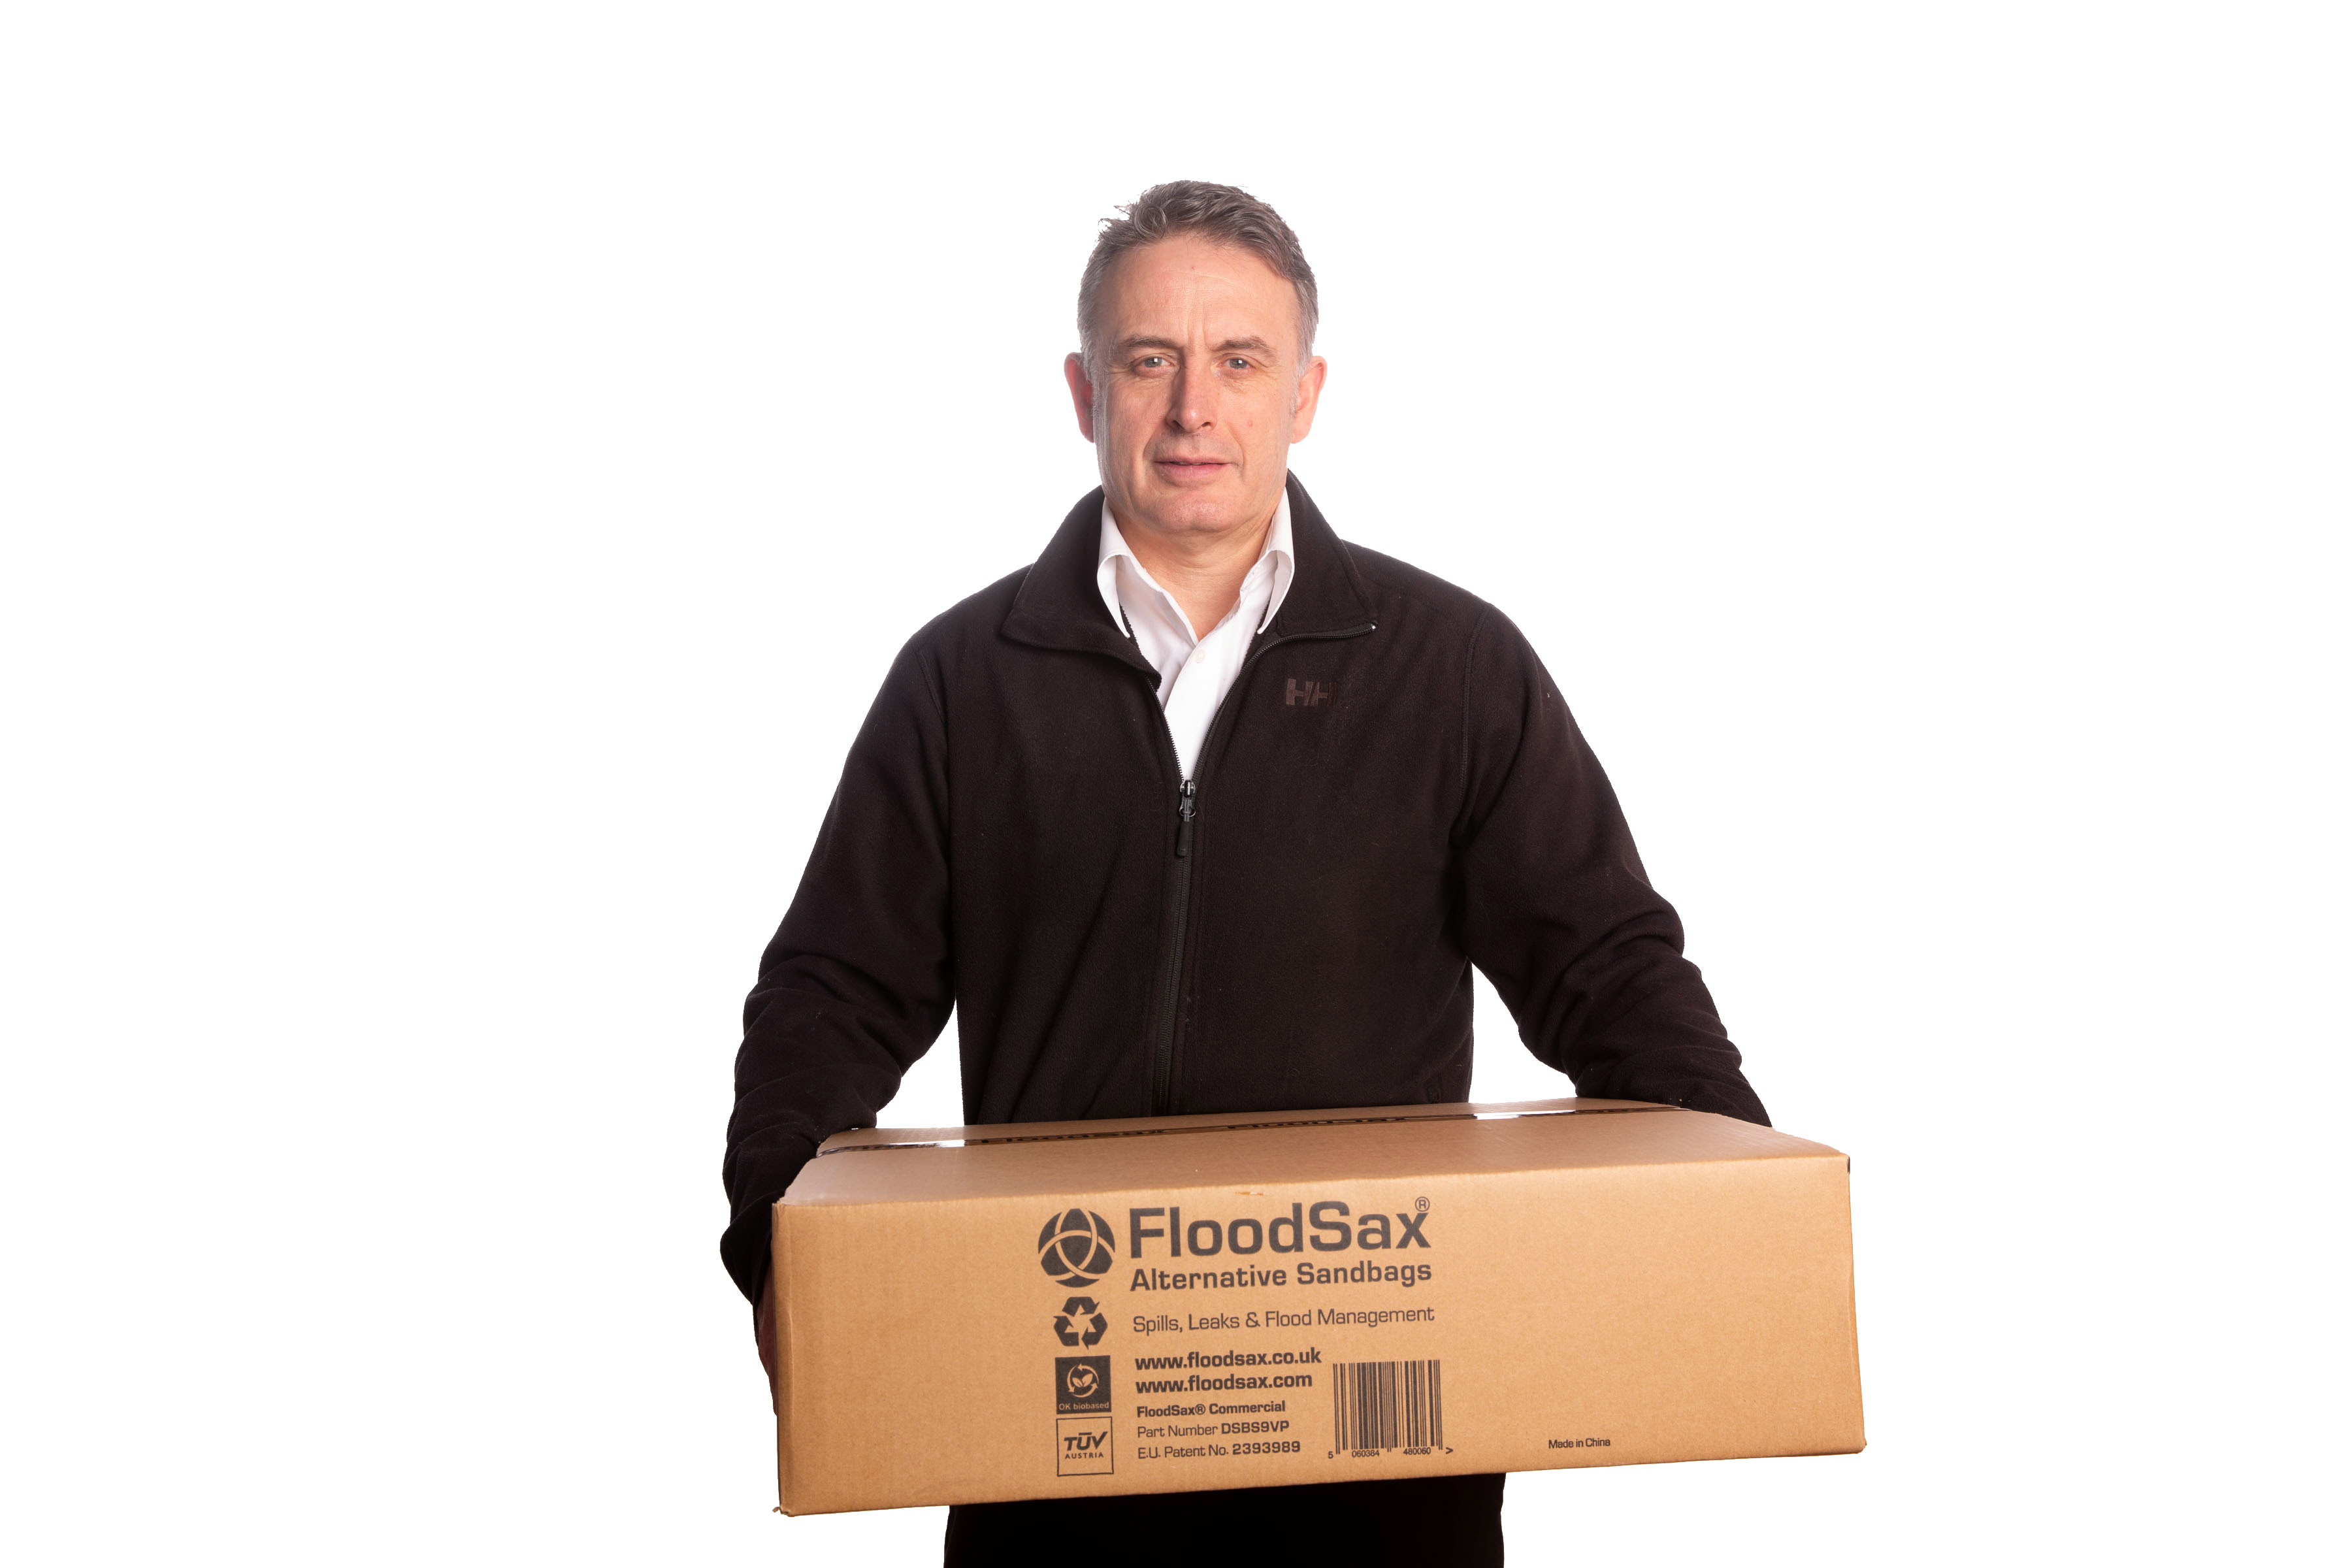 It's easy to carry 20 FloodSax ... imagine trying to cary 20 sandbags